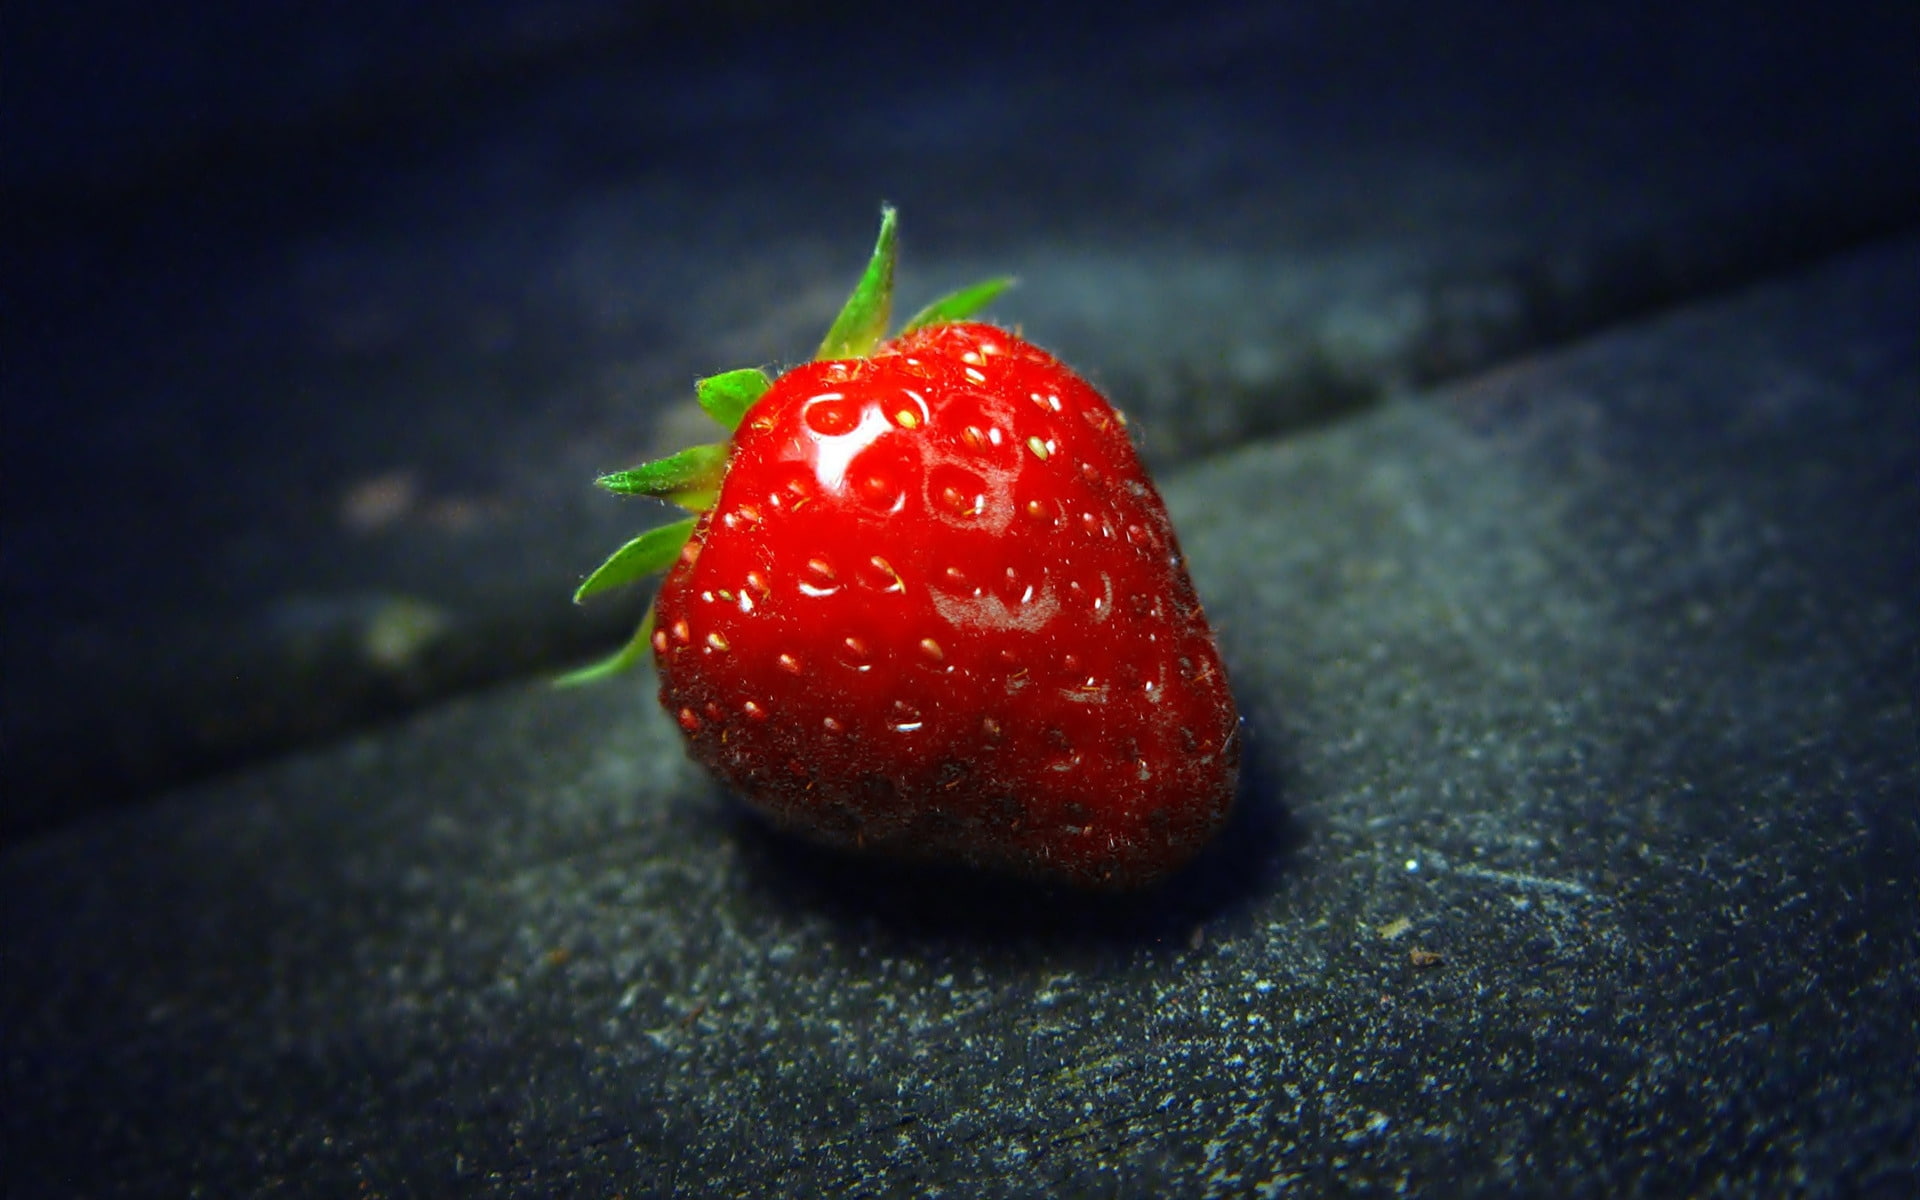 The Strawberry, fruits